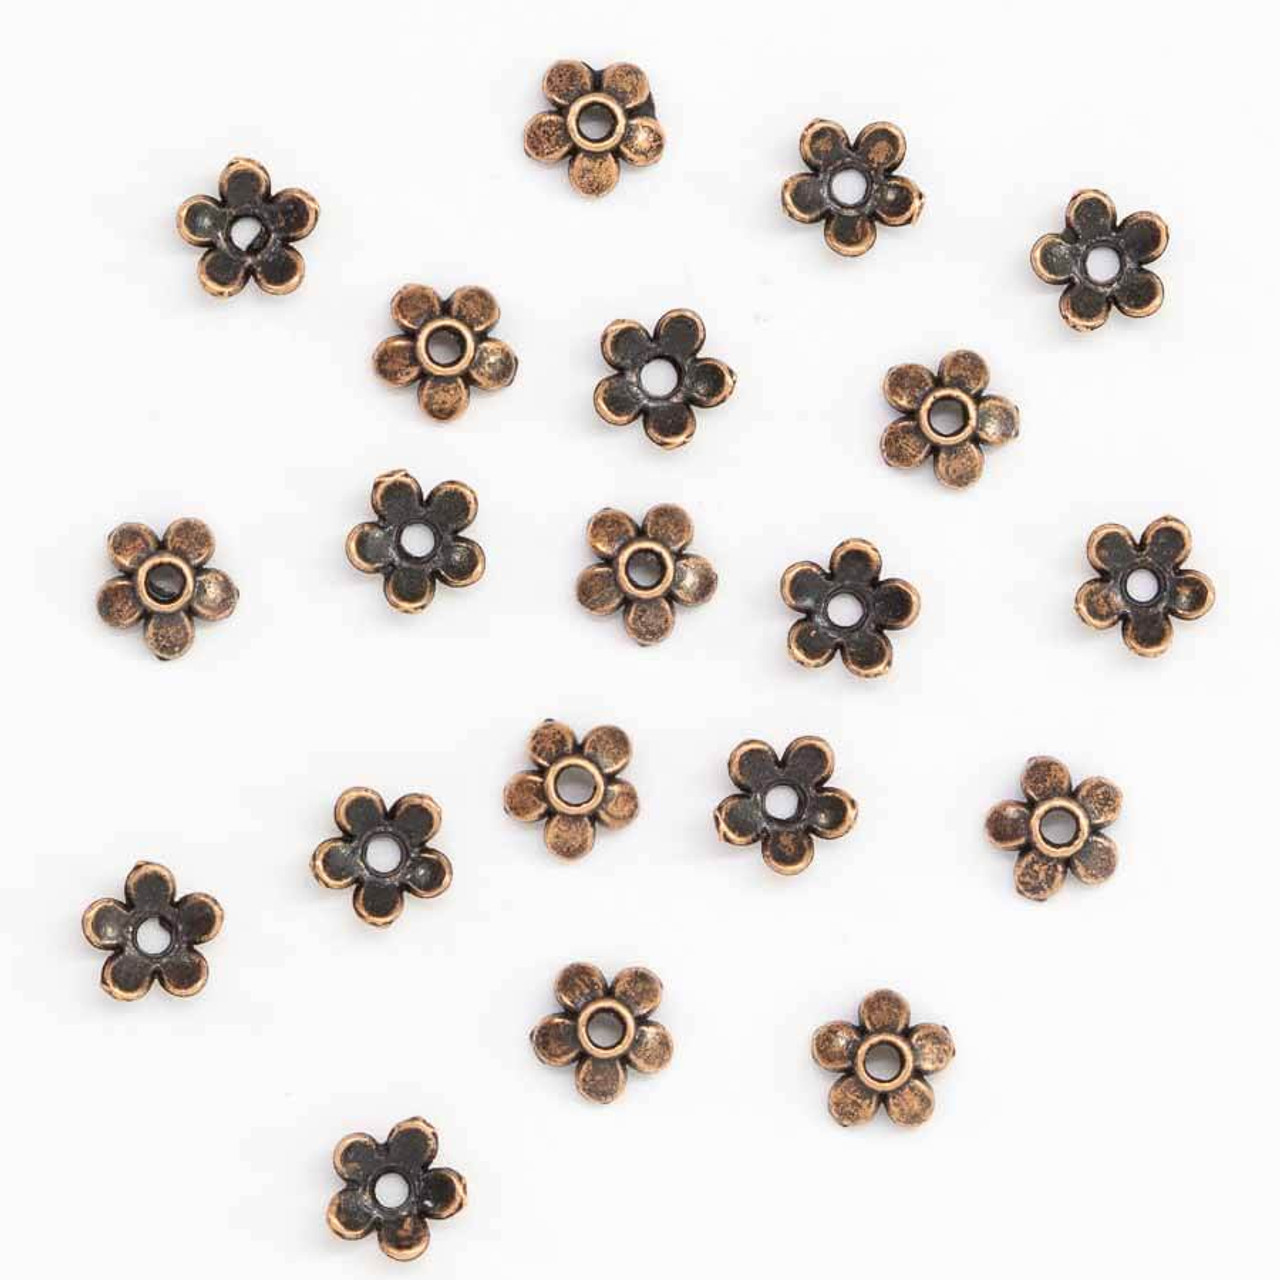 9mm Antique Silver Metal Beads,Flower Charm Bead Caps,Buddhism